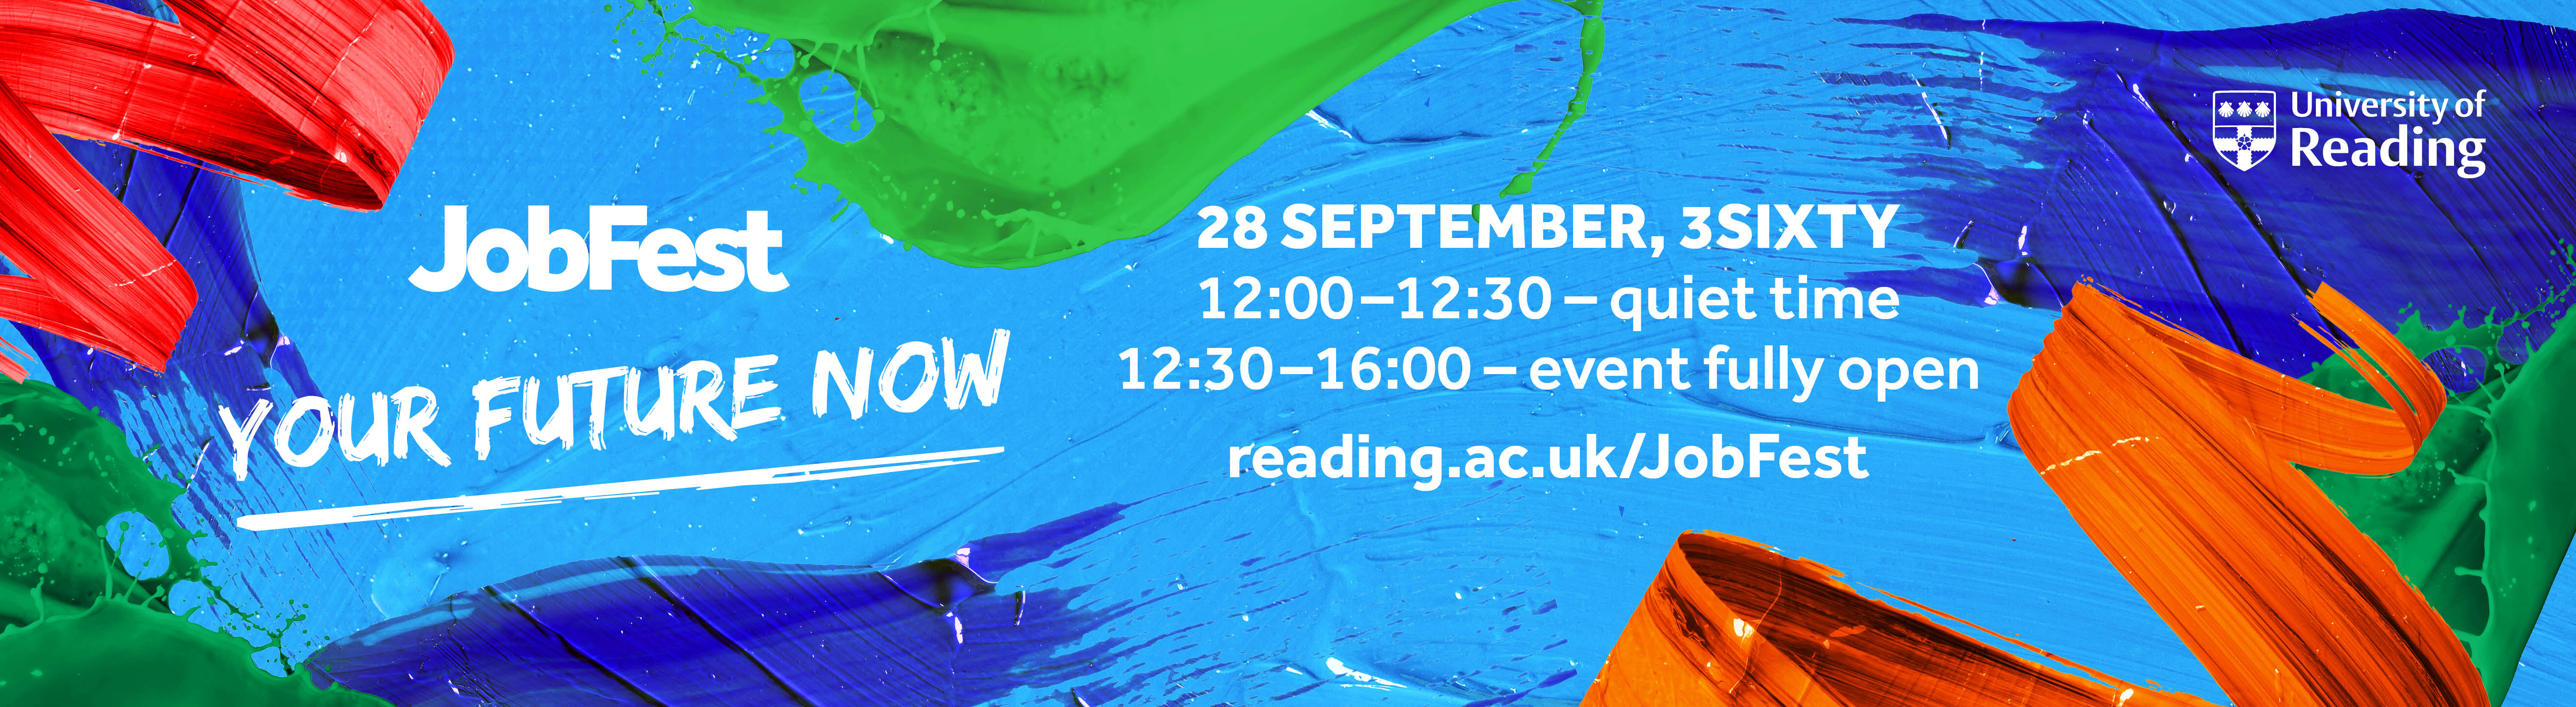 JobFest, your future now, 28 September, 3Sixty, 12:00 - 12:30 - quiet time, 12:30 - 16:00 - event fully open, reading.ac.uk/JobFest